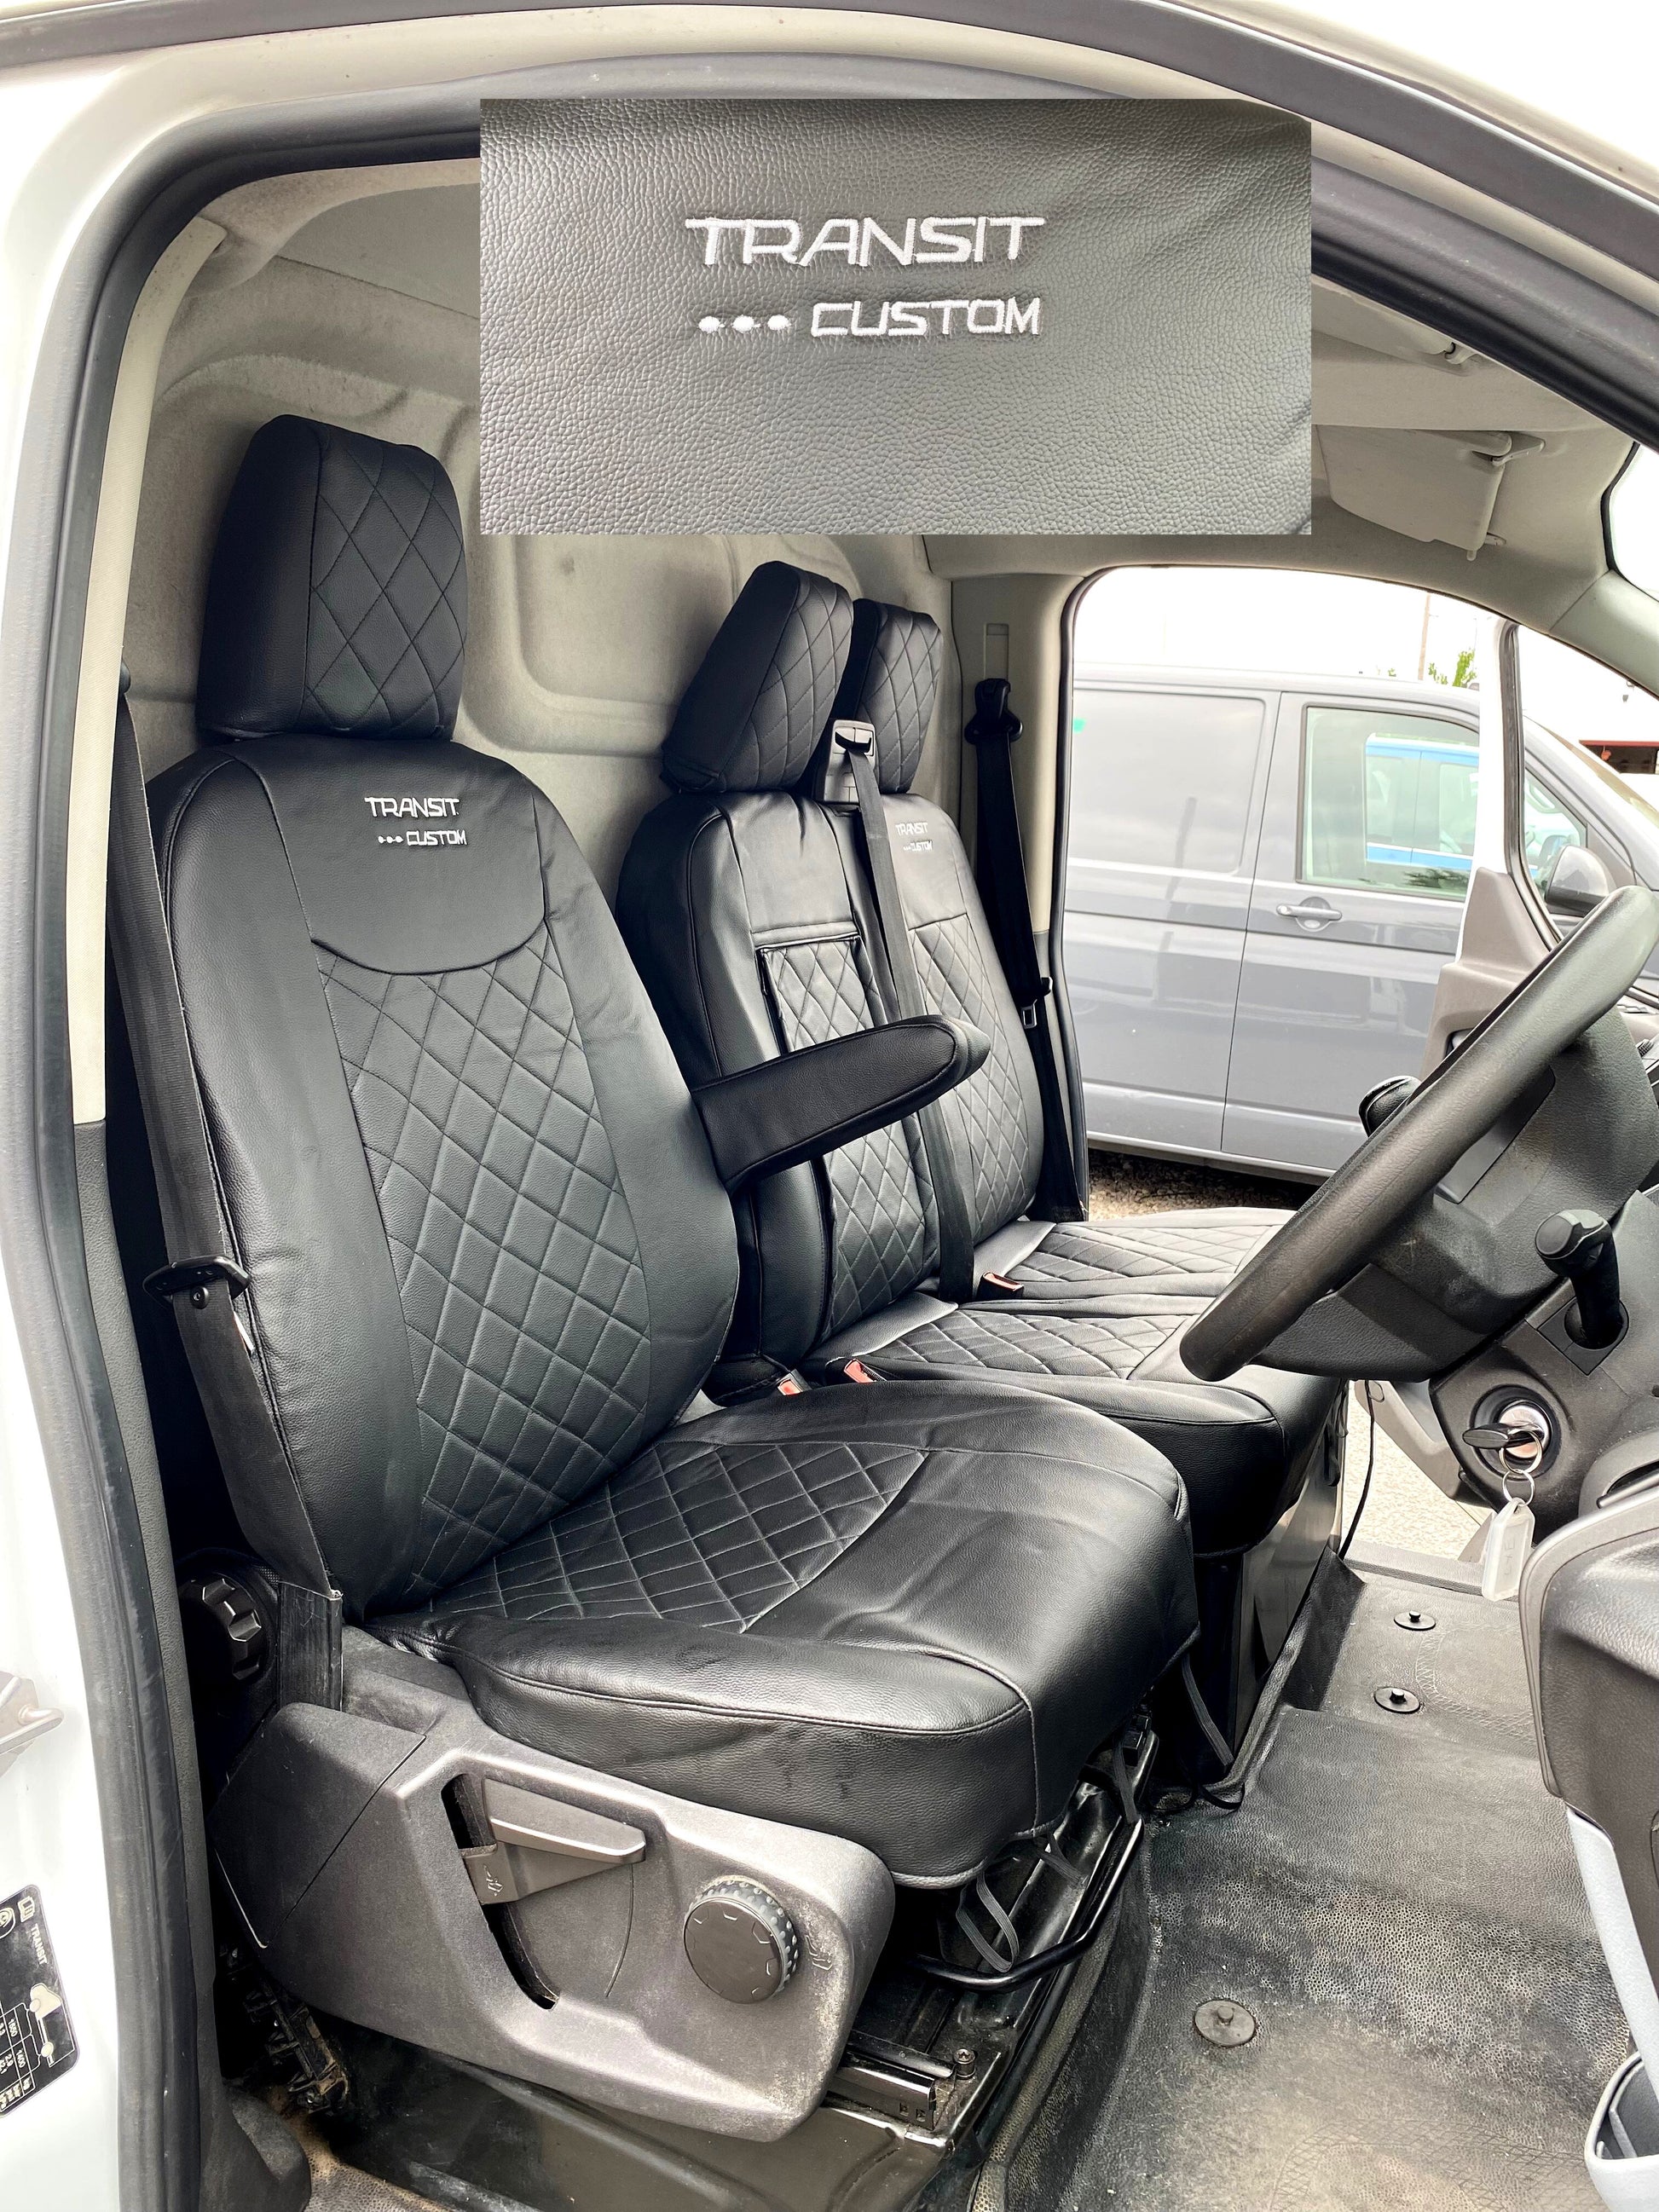 Ford Transit Custom Seat Covers - with Transit Custom LOGO – Miles of  smiles seat covers